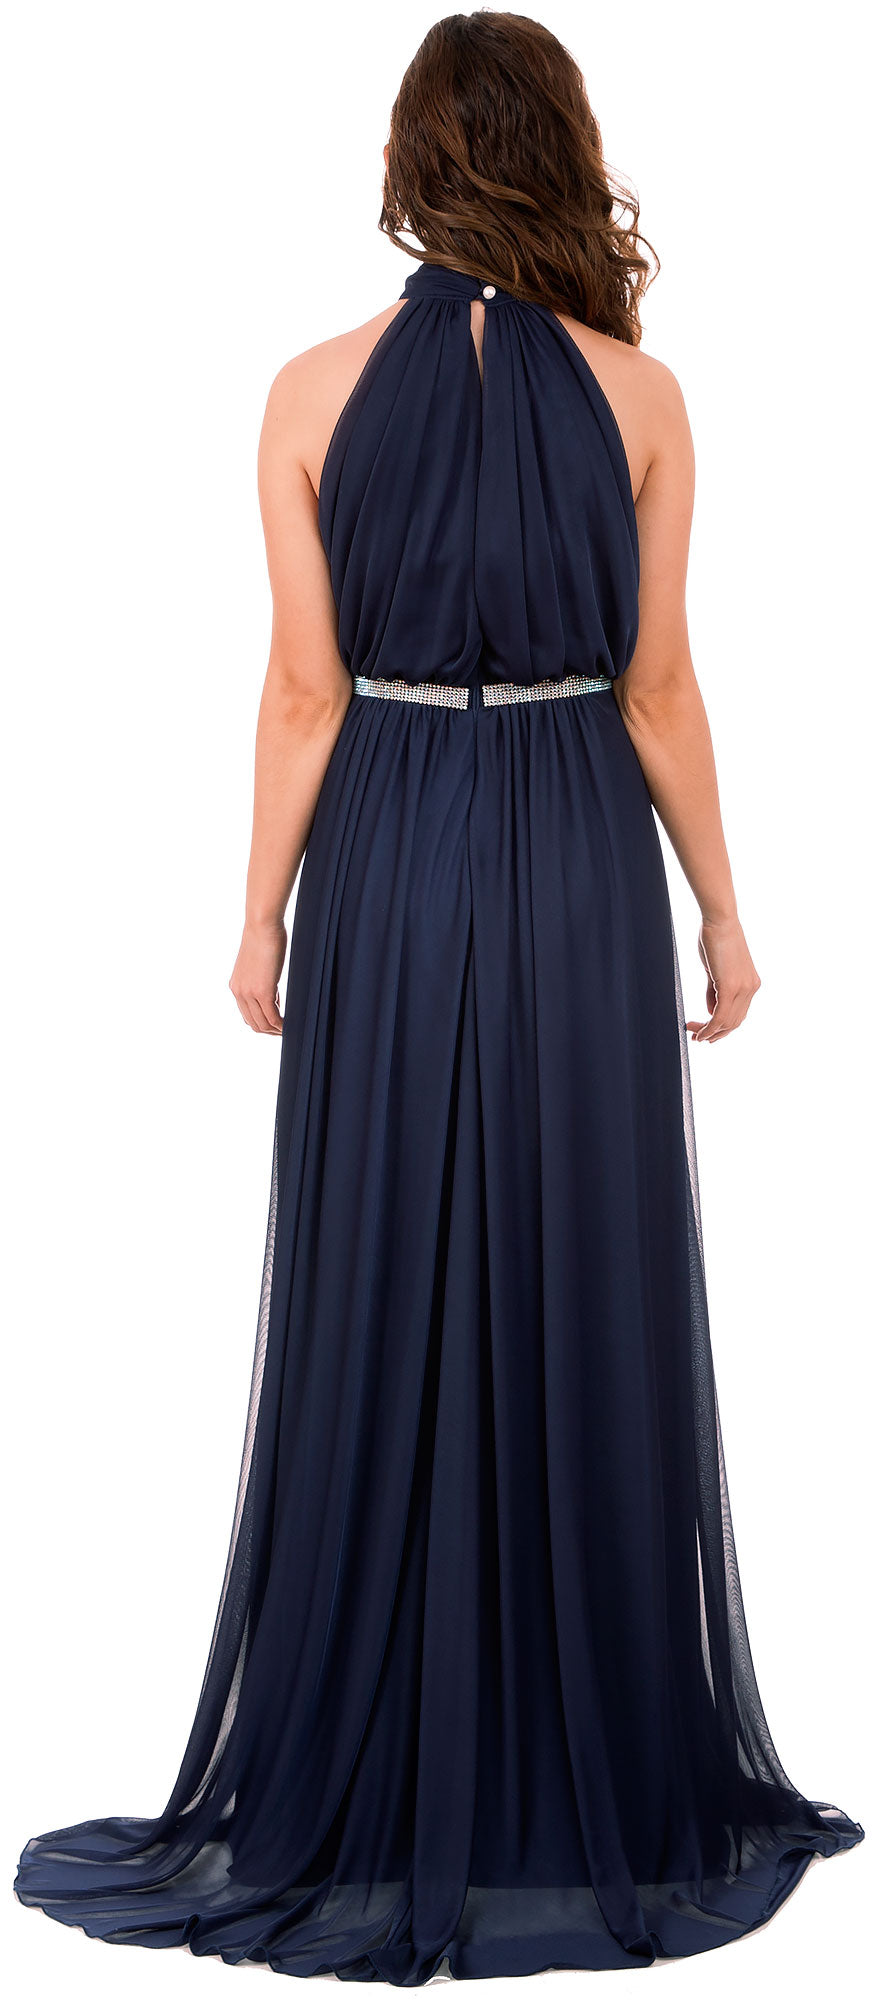 Image of High Halter Neck Long Formal Bridesmaid Dress With Keyhole back in Navy